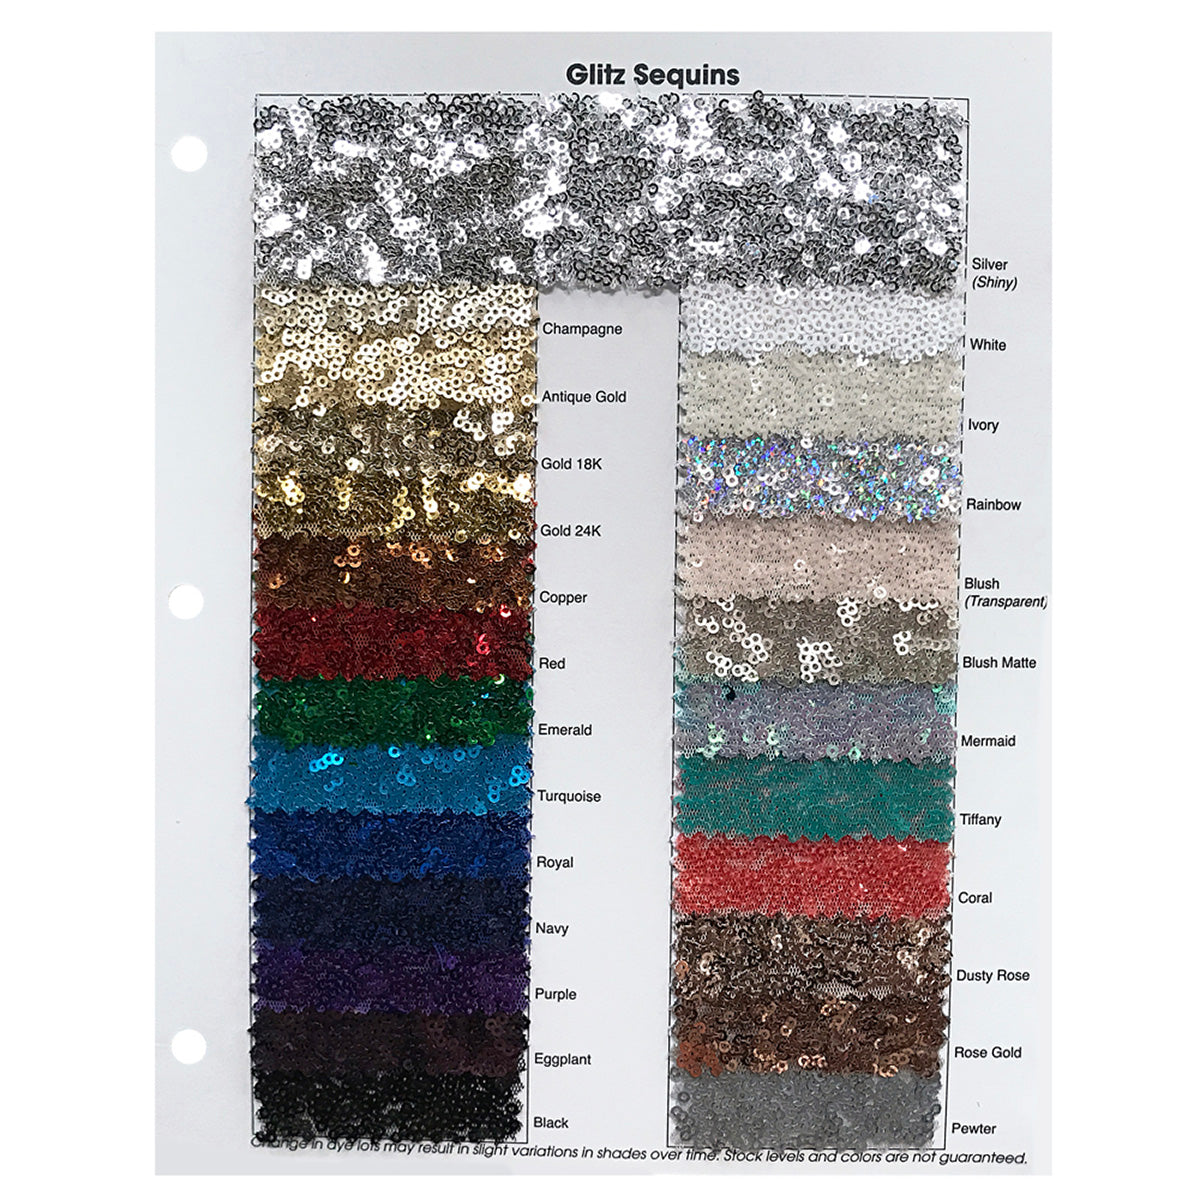 Luxurious Mesh Glitz Sequin Fabric By The Roll (20 yards) Fabric Wholesale